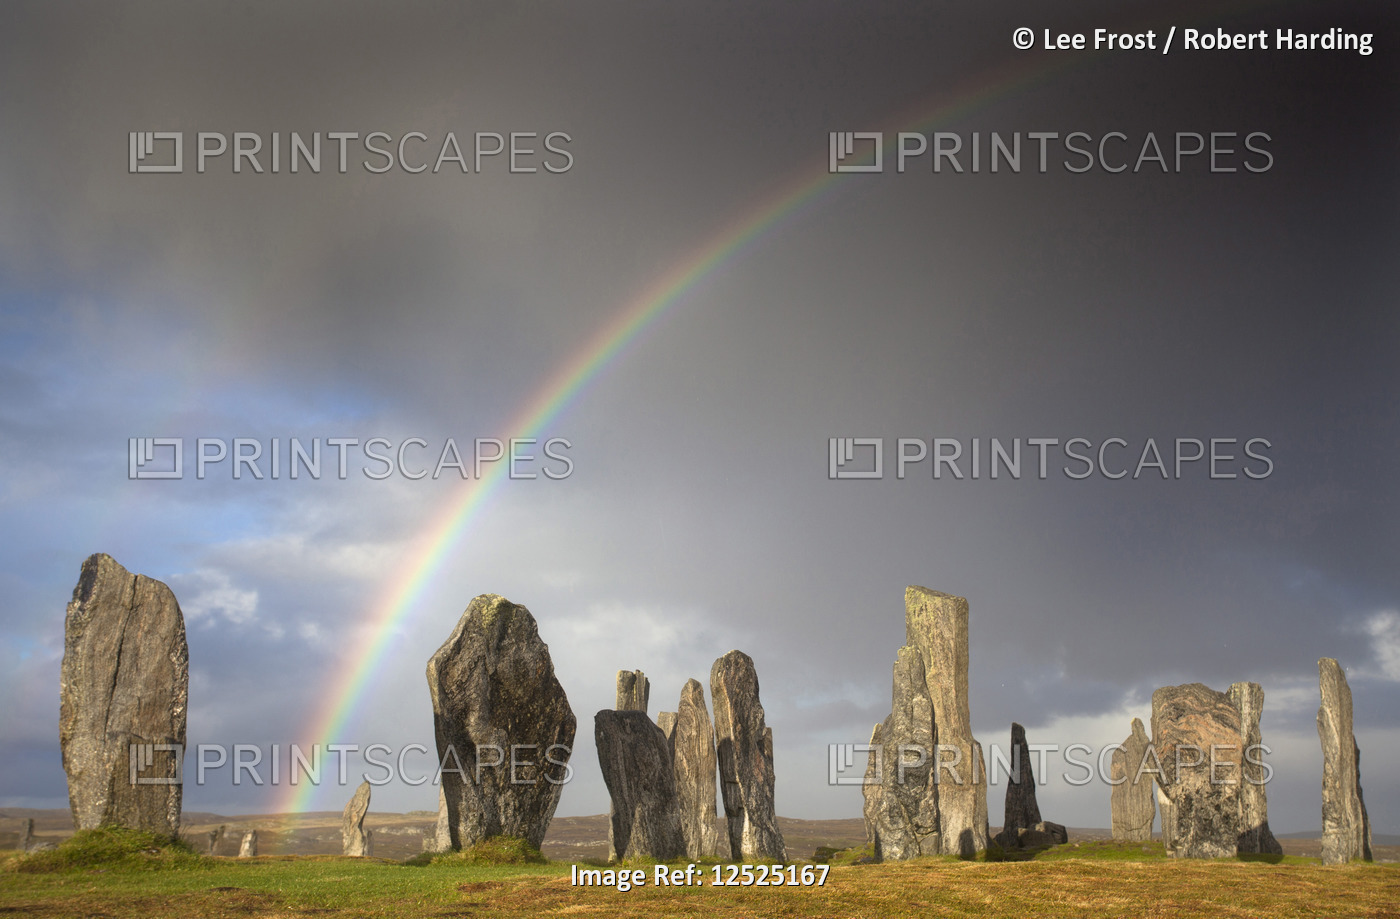 Standing Stones of Callanish bathed in sunlight with a rainbow arching across the sky in the backgro